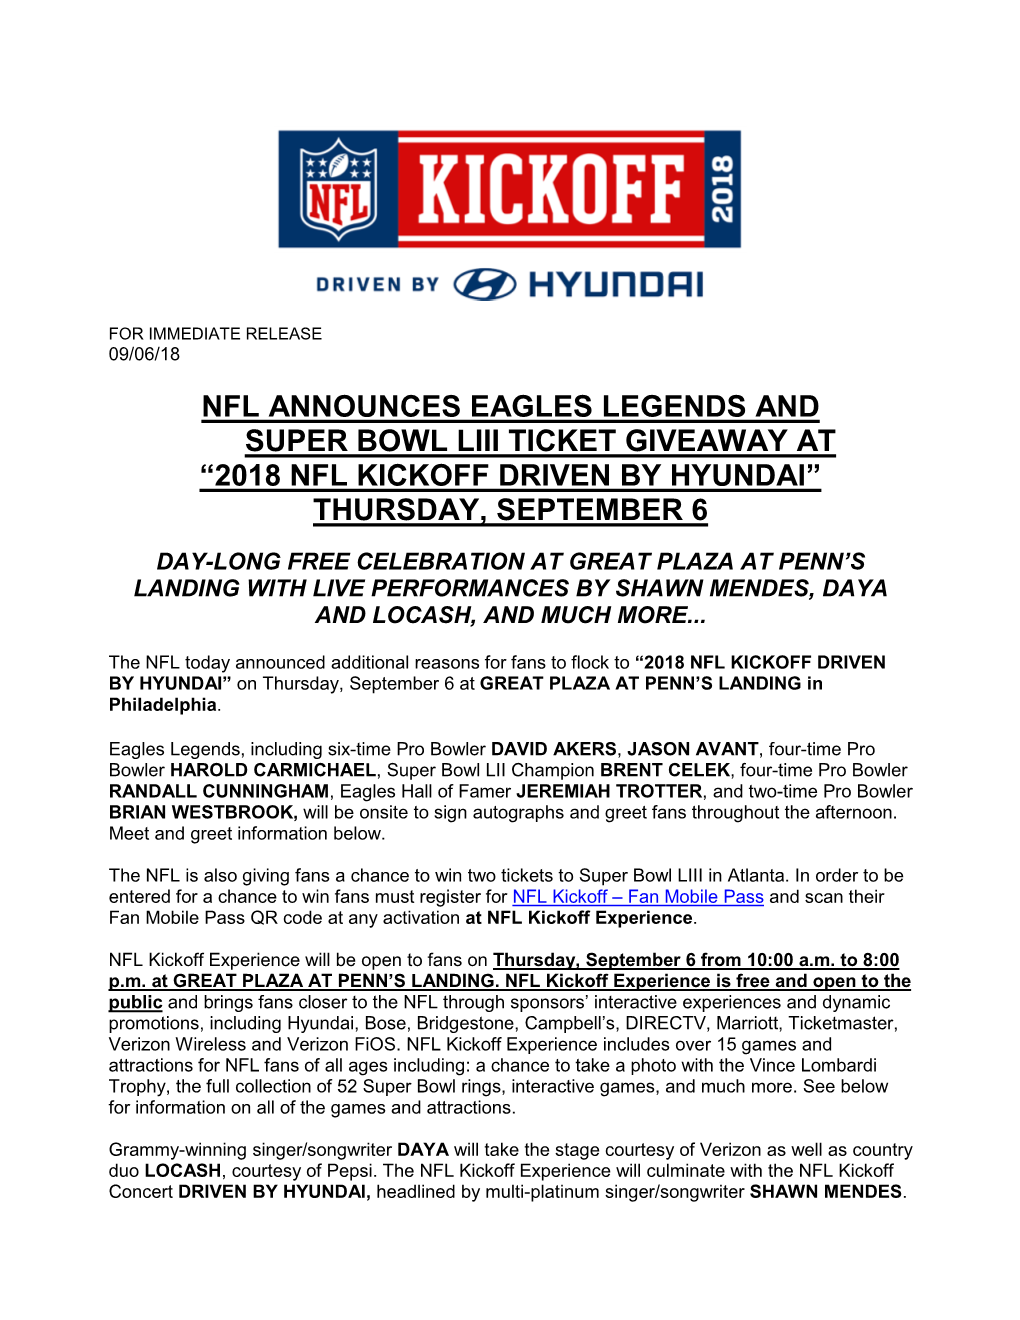 Nfl Announces Eagles Legends and Super Bowl Liii Ticket Giveaway at “2018 Nfl Kickoff Driven by Hyundai” Thursday, September 6